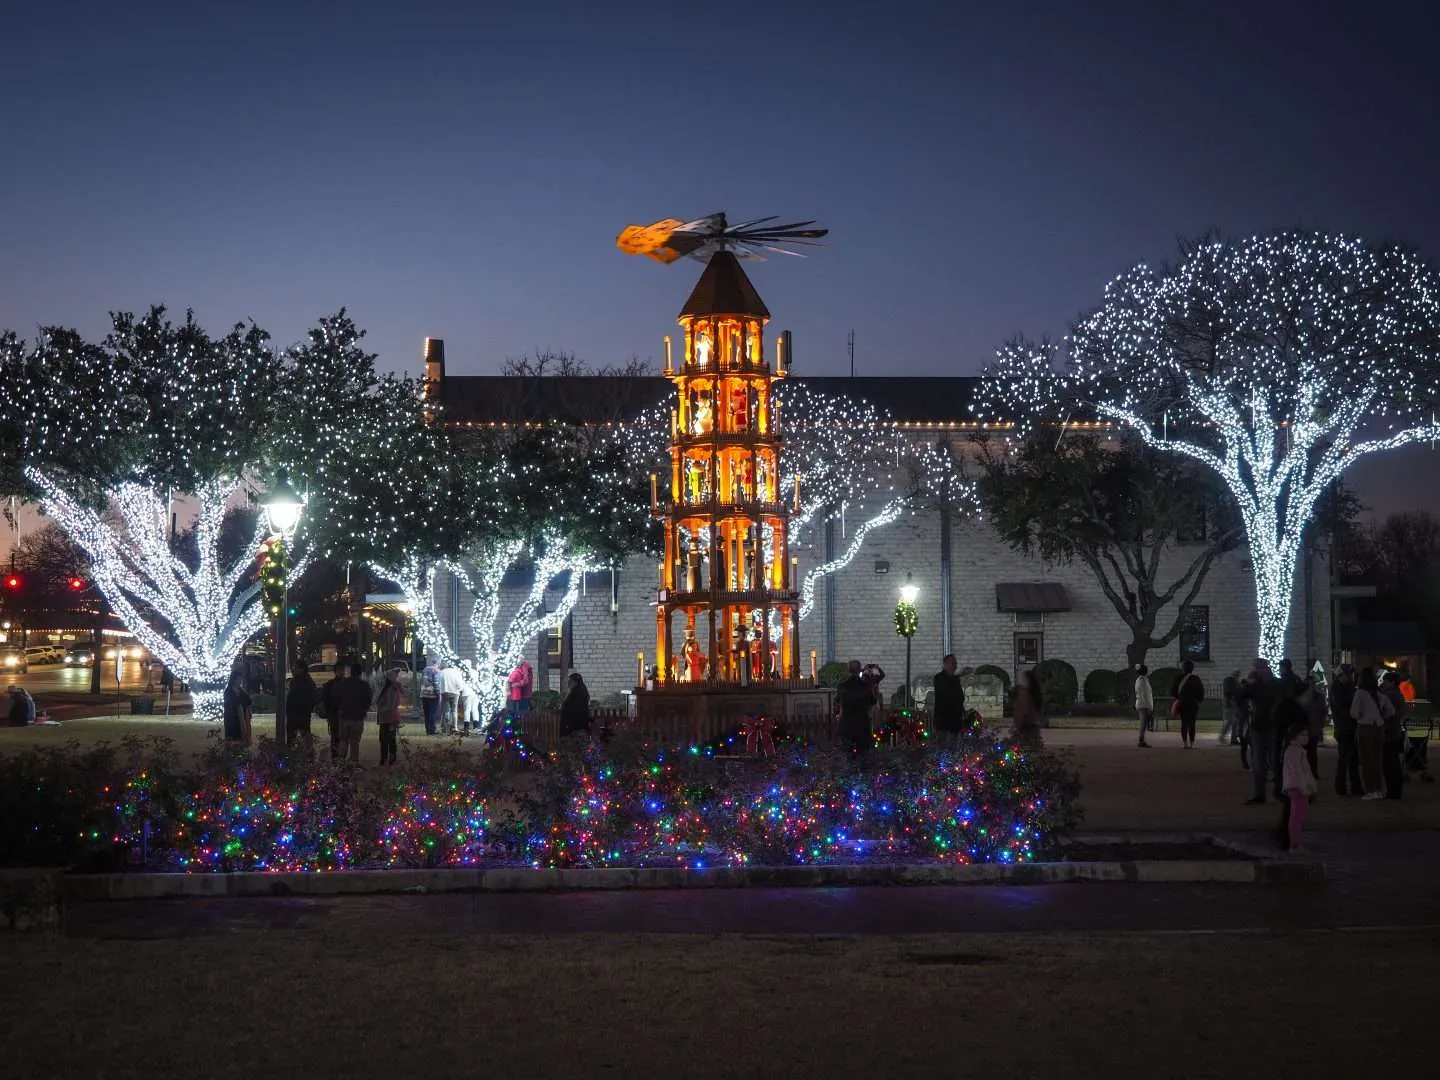 Things to do in Fredericksburg, TX: See the Christmas pyramid.